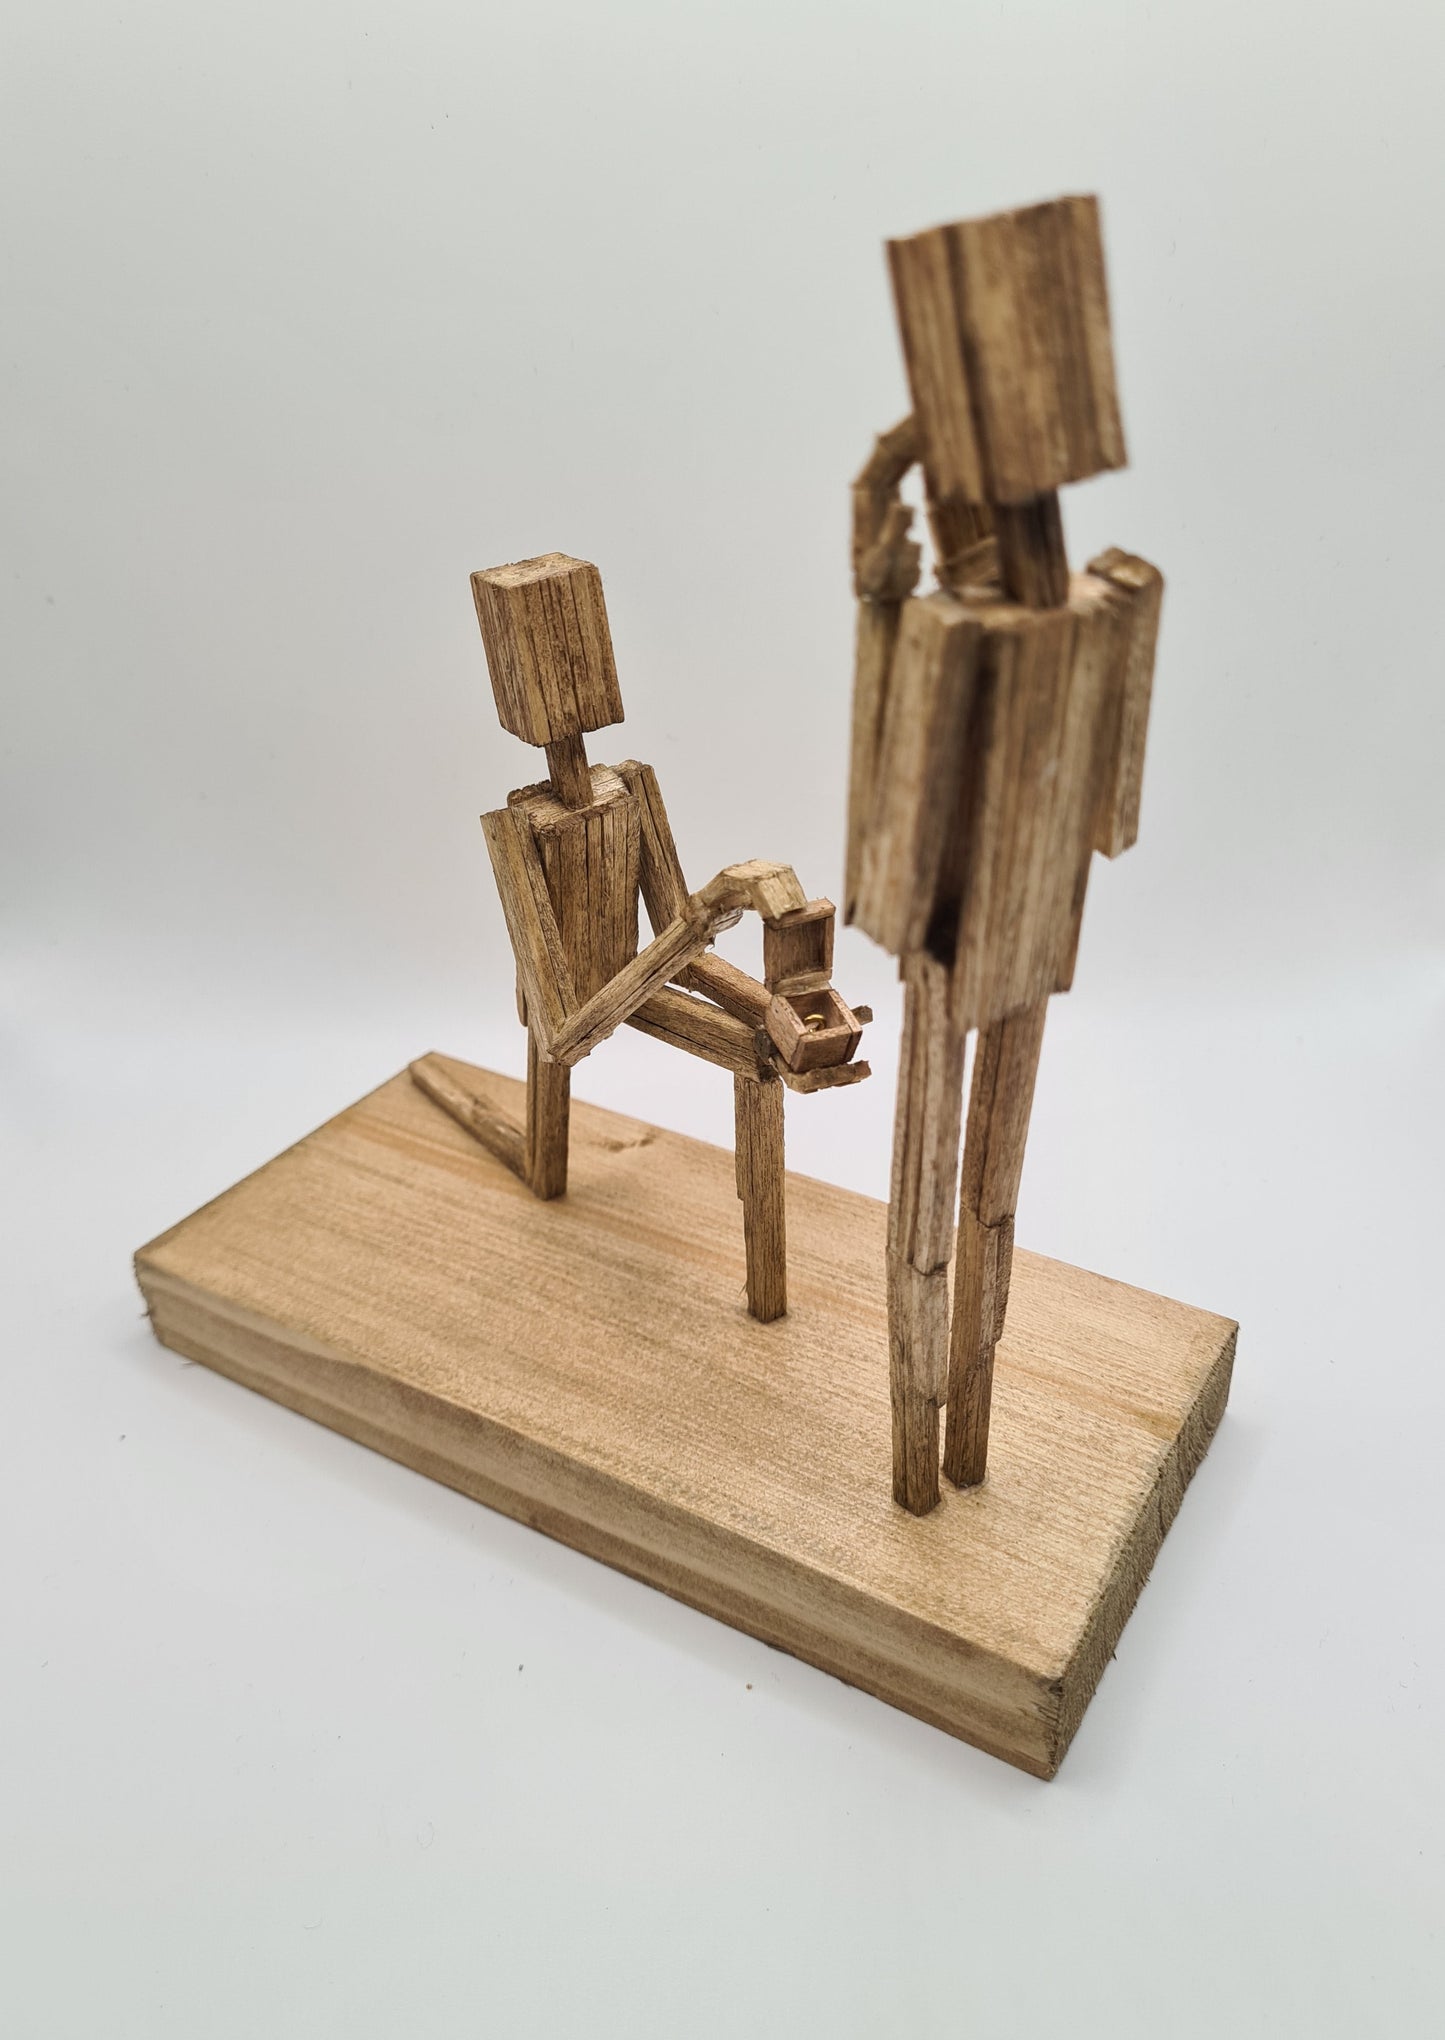 Proposal - Handcrafted Wooden Matchstick Figures - Gifts, Ornaments and Decor By Tiggidy Designs